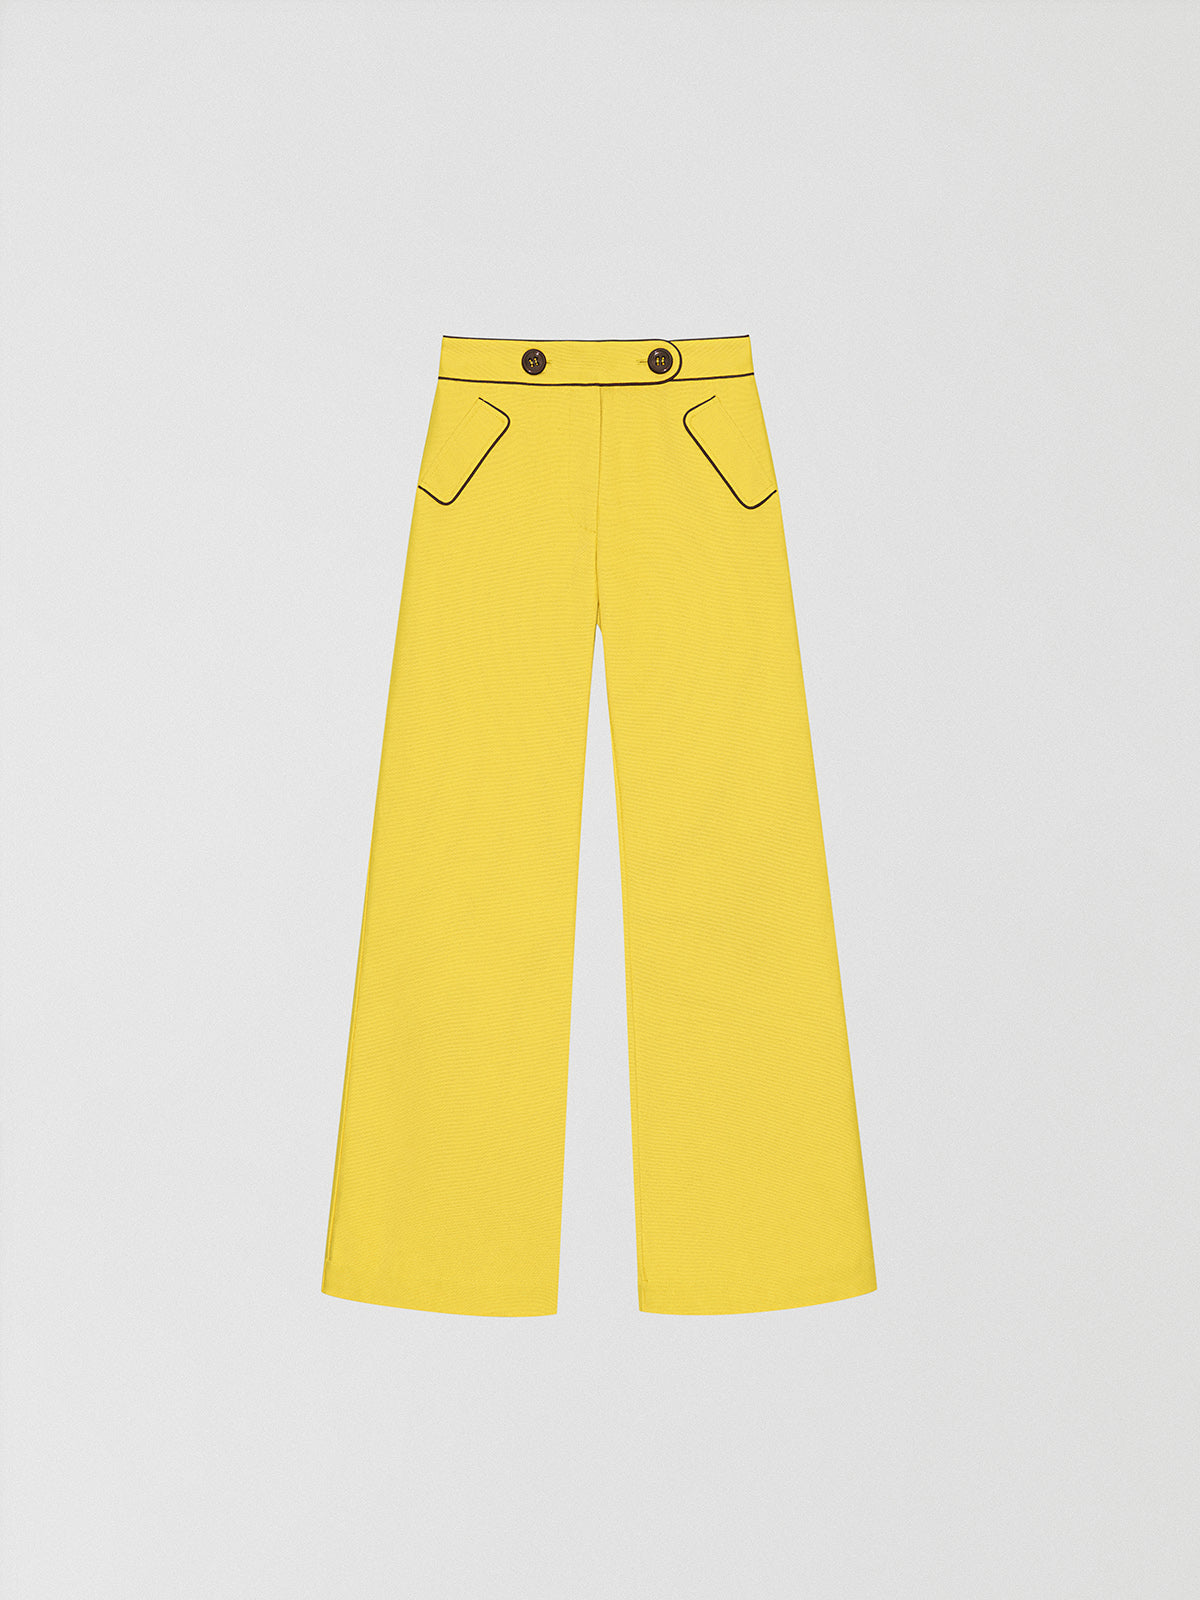 Yellow pique trousers with medium rise.